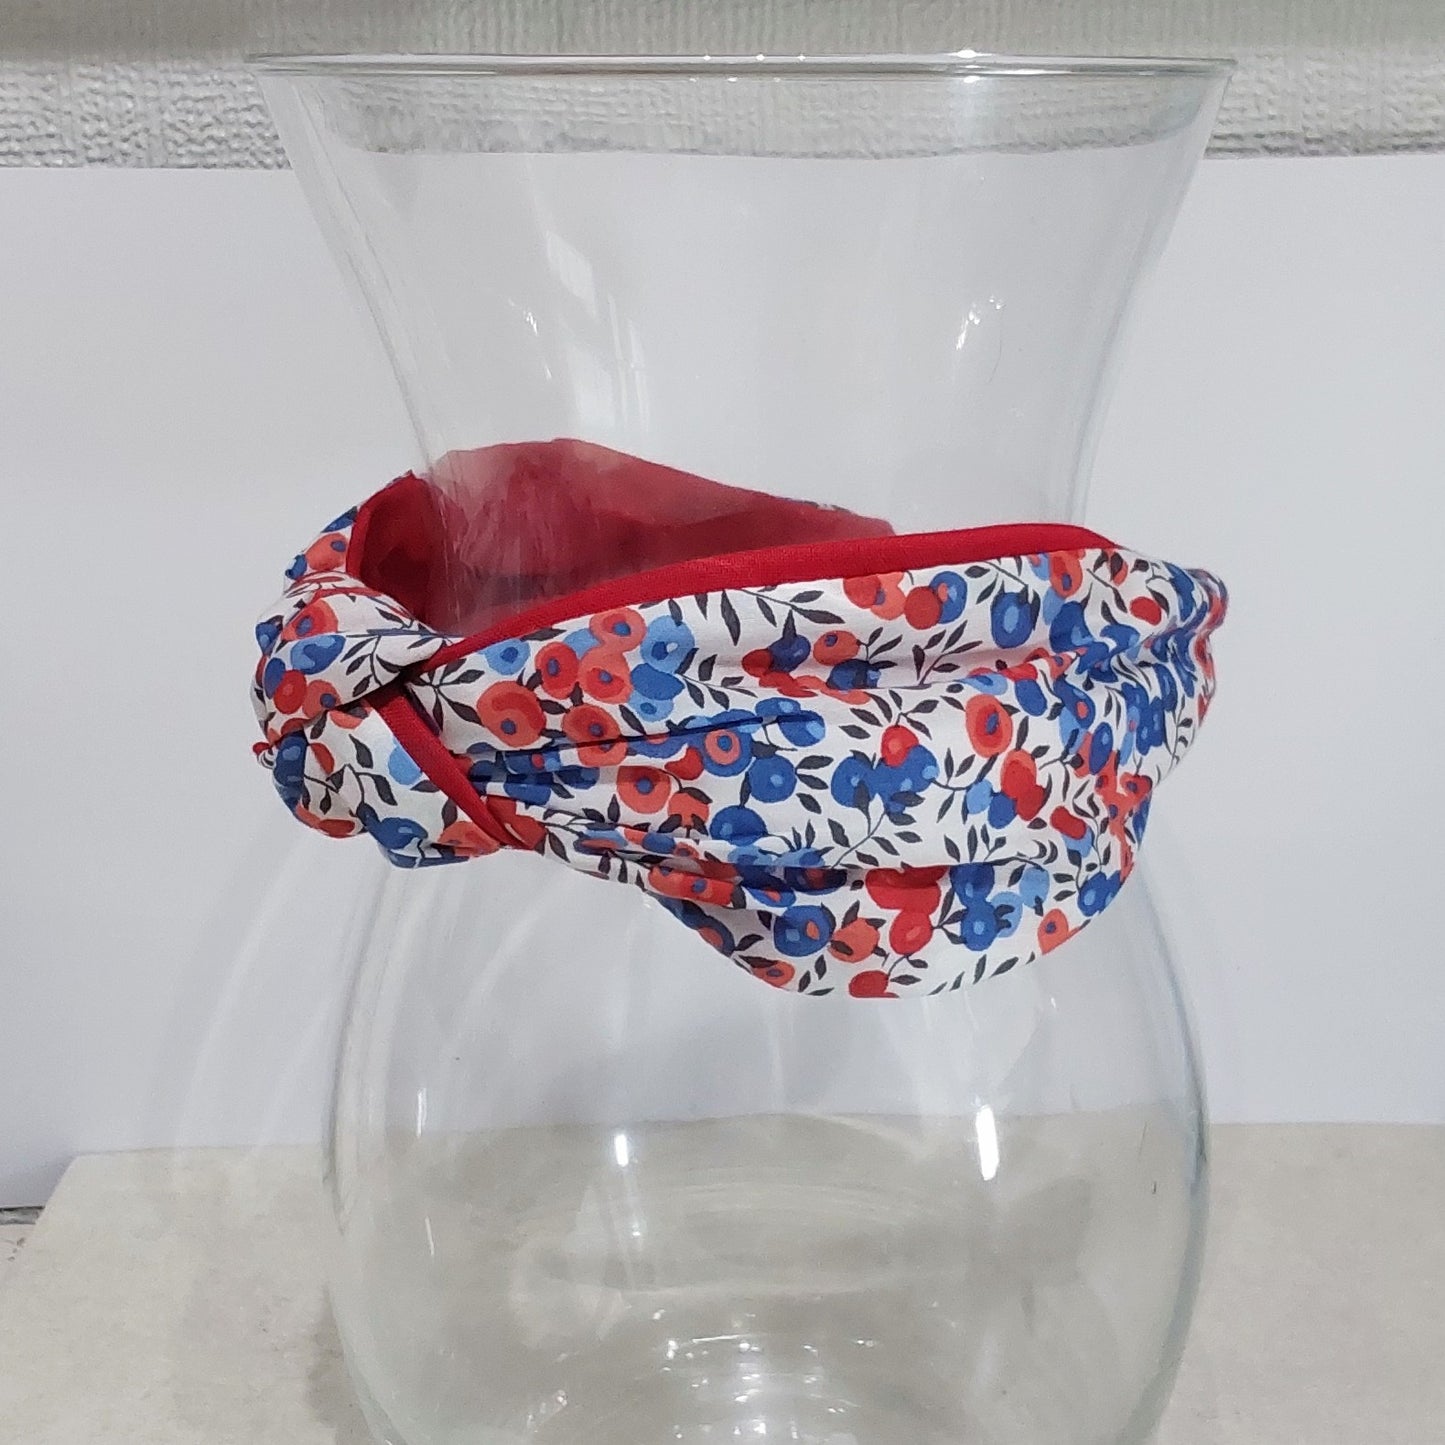 Hairband Liberty of London Wiltshire Berry Red Blue Cotton Fabric Bespoke Top Knot Headband